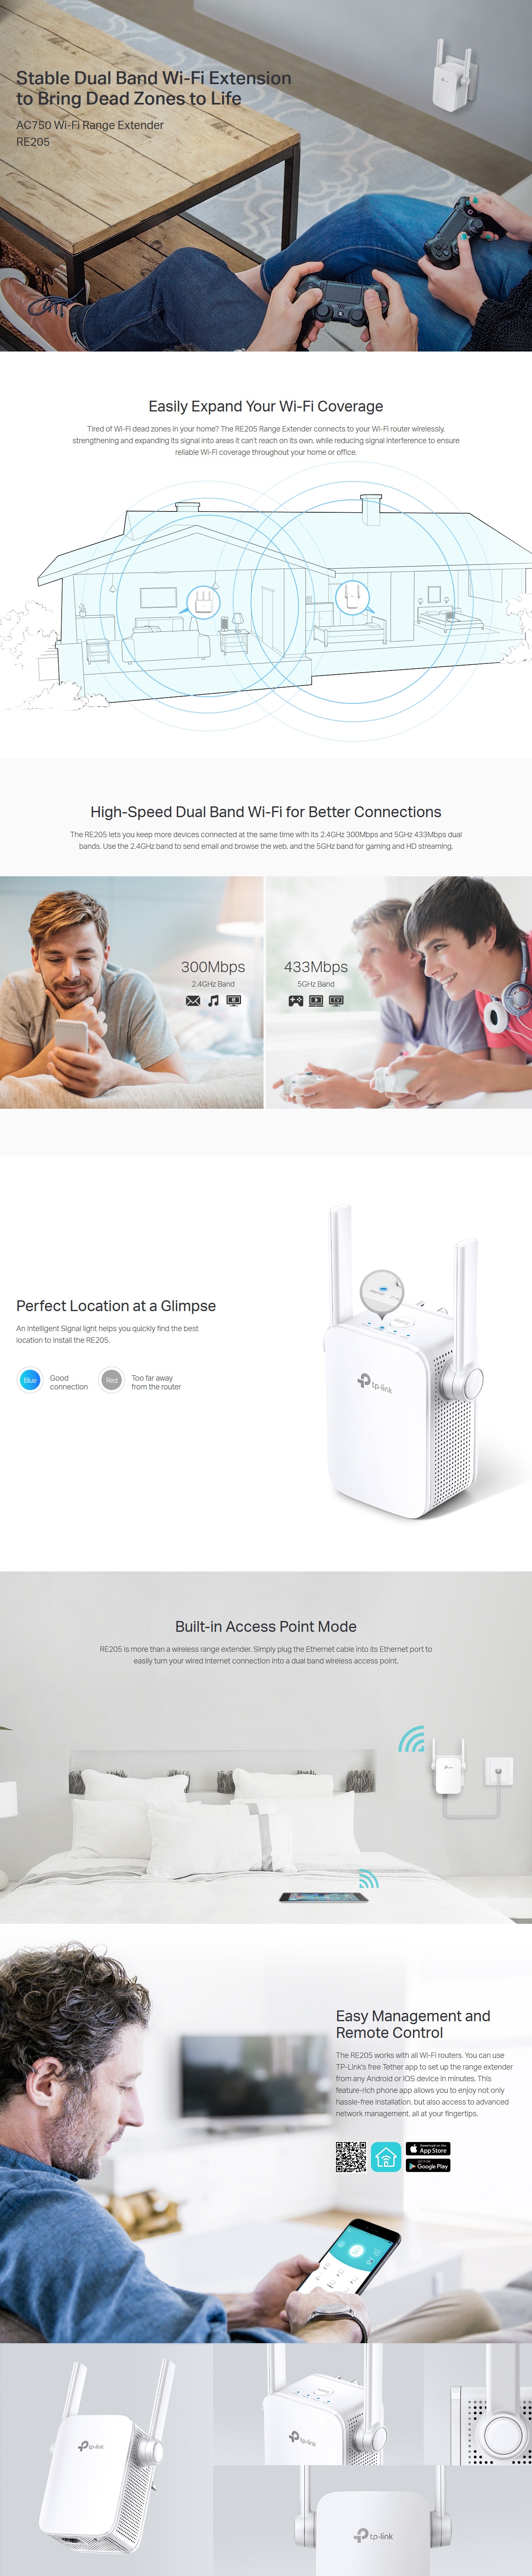 A large marketing image providing additional information about the product TP-Link RE205 AC750 Wi-Fi Range Extender - Additional alt info not provided